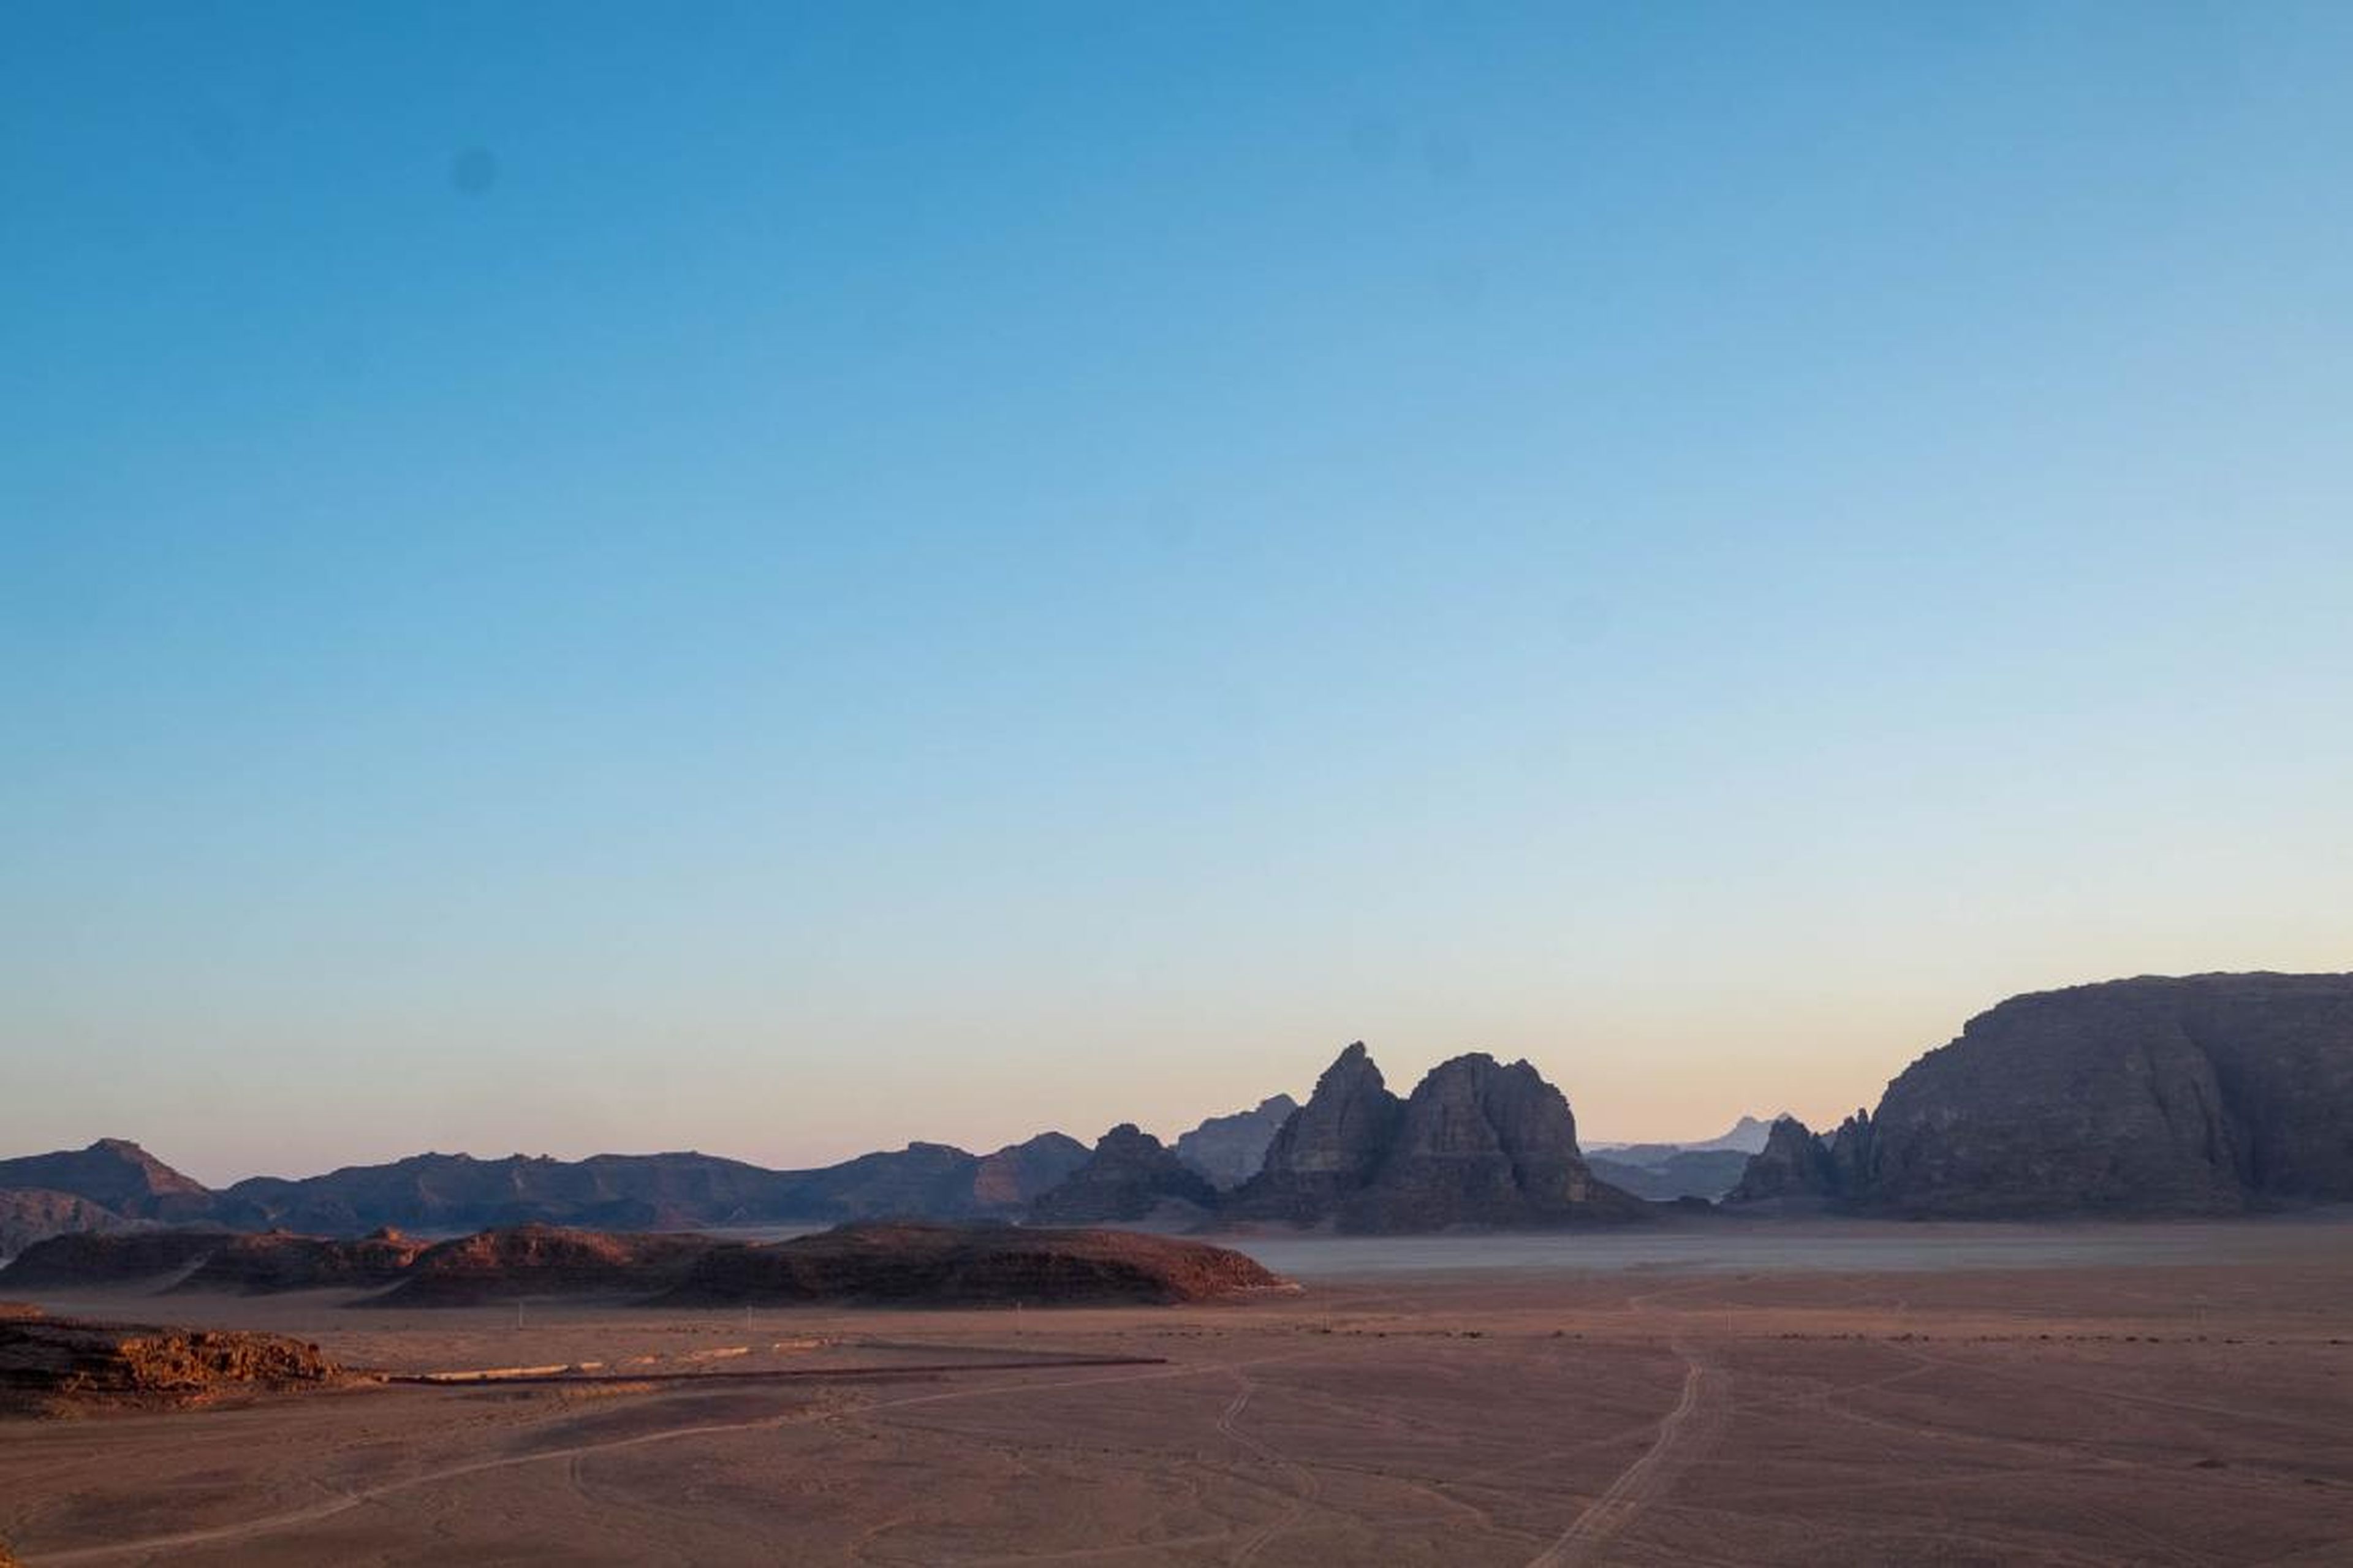 The tour in Jordan was made even more epic because, after leaving Petra, I spent the night in Wadi Rum, a desert valley in Jordan. It has played the part of Mars and distant planets in countless movies, including "The Martian,"